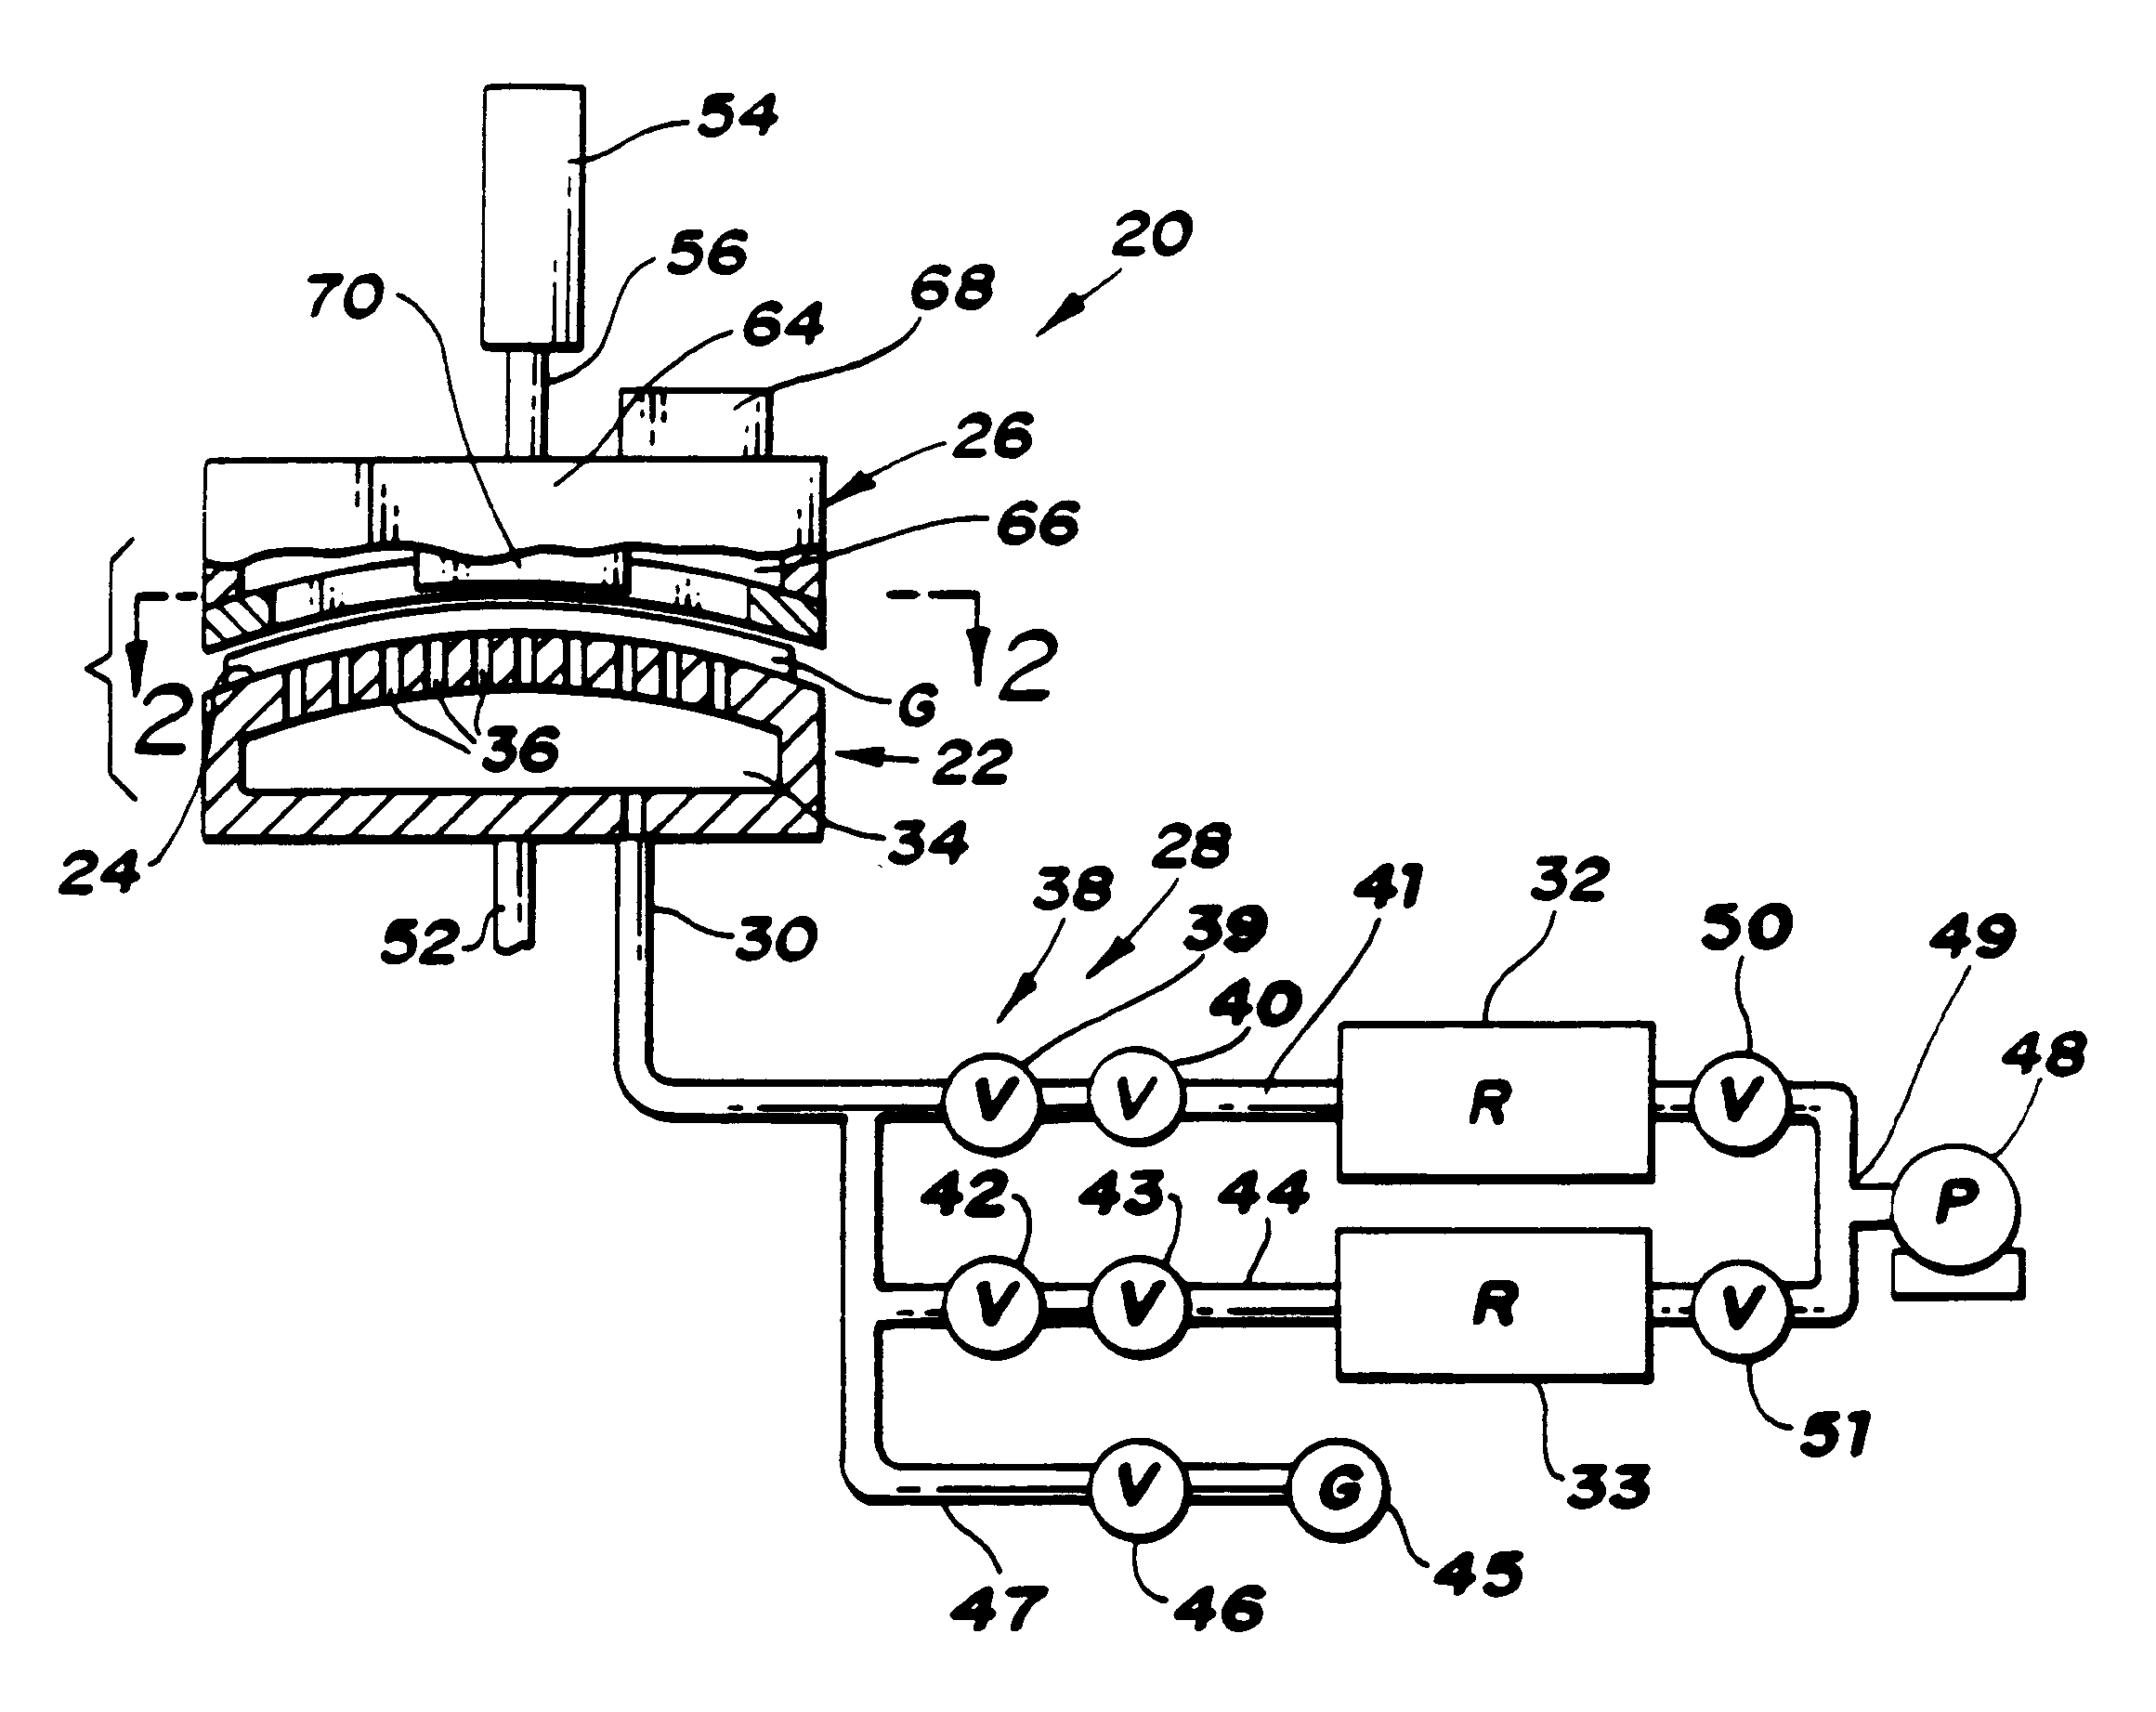 Apparatus for vacuum impulse forming of heated glass sheets